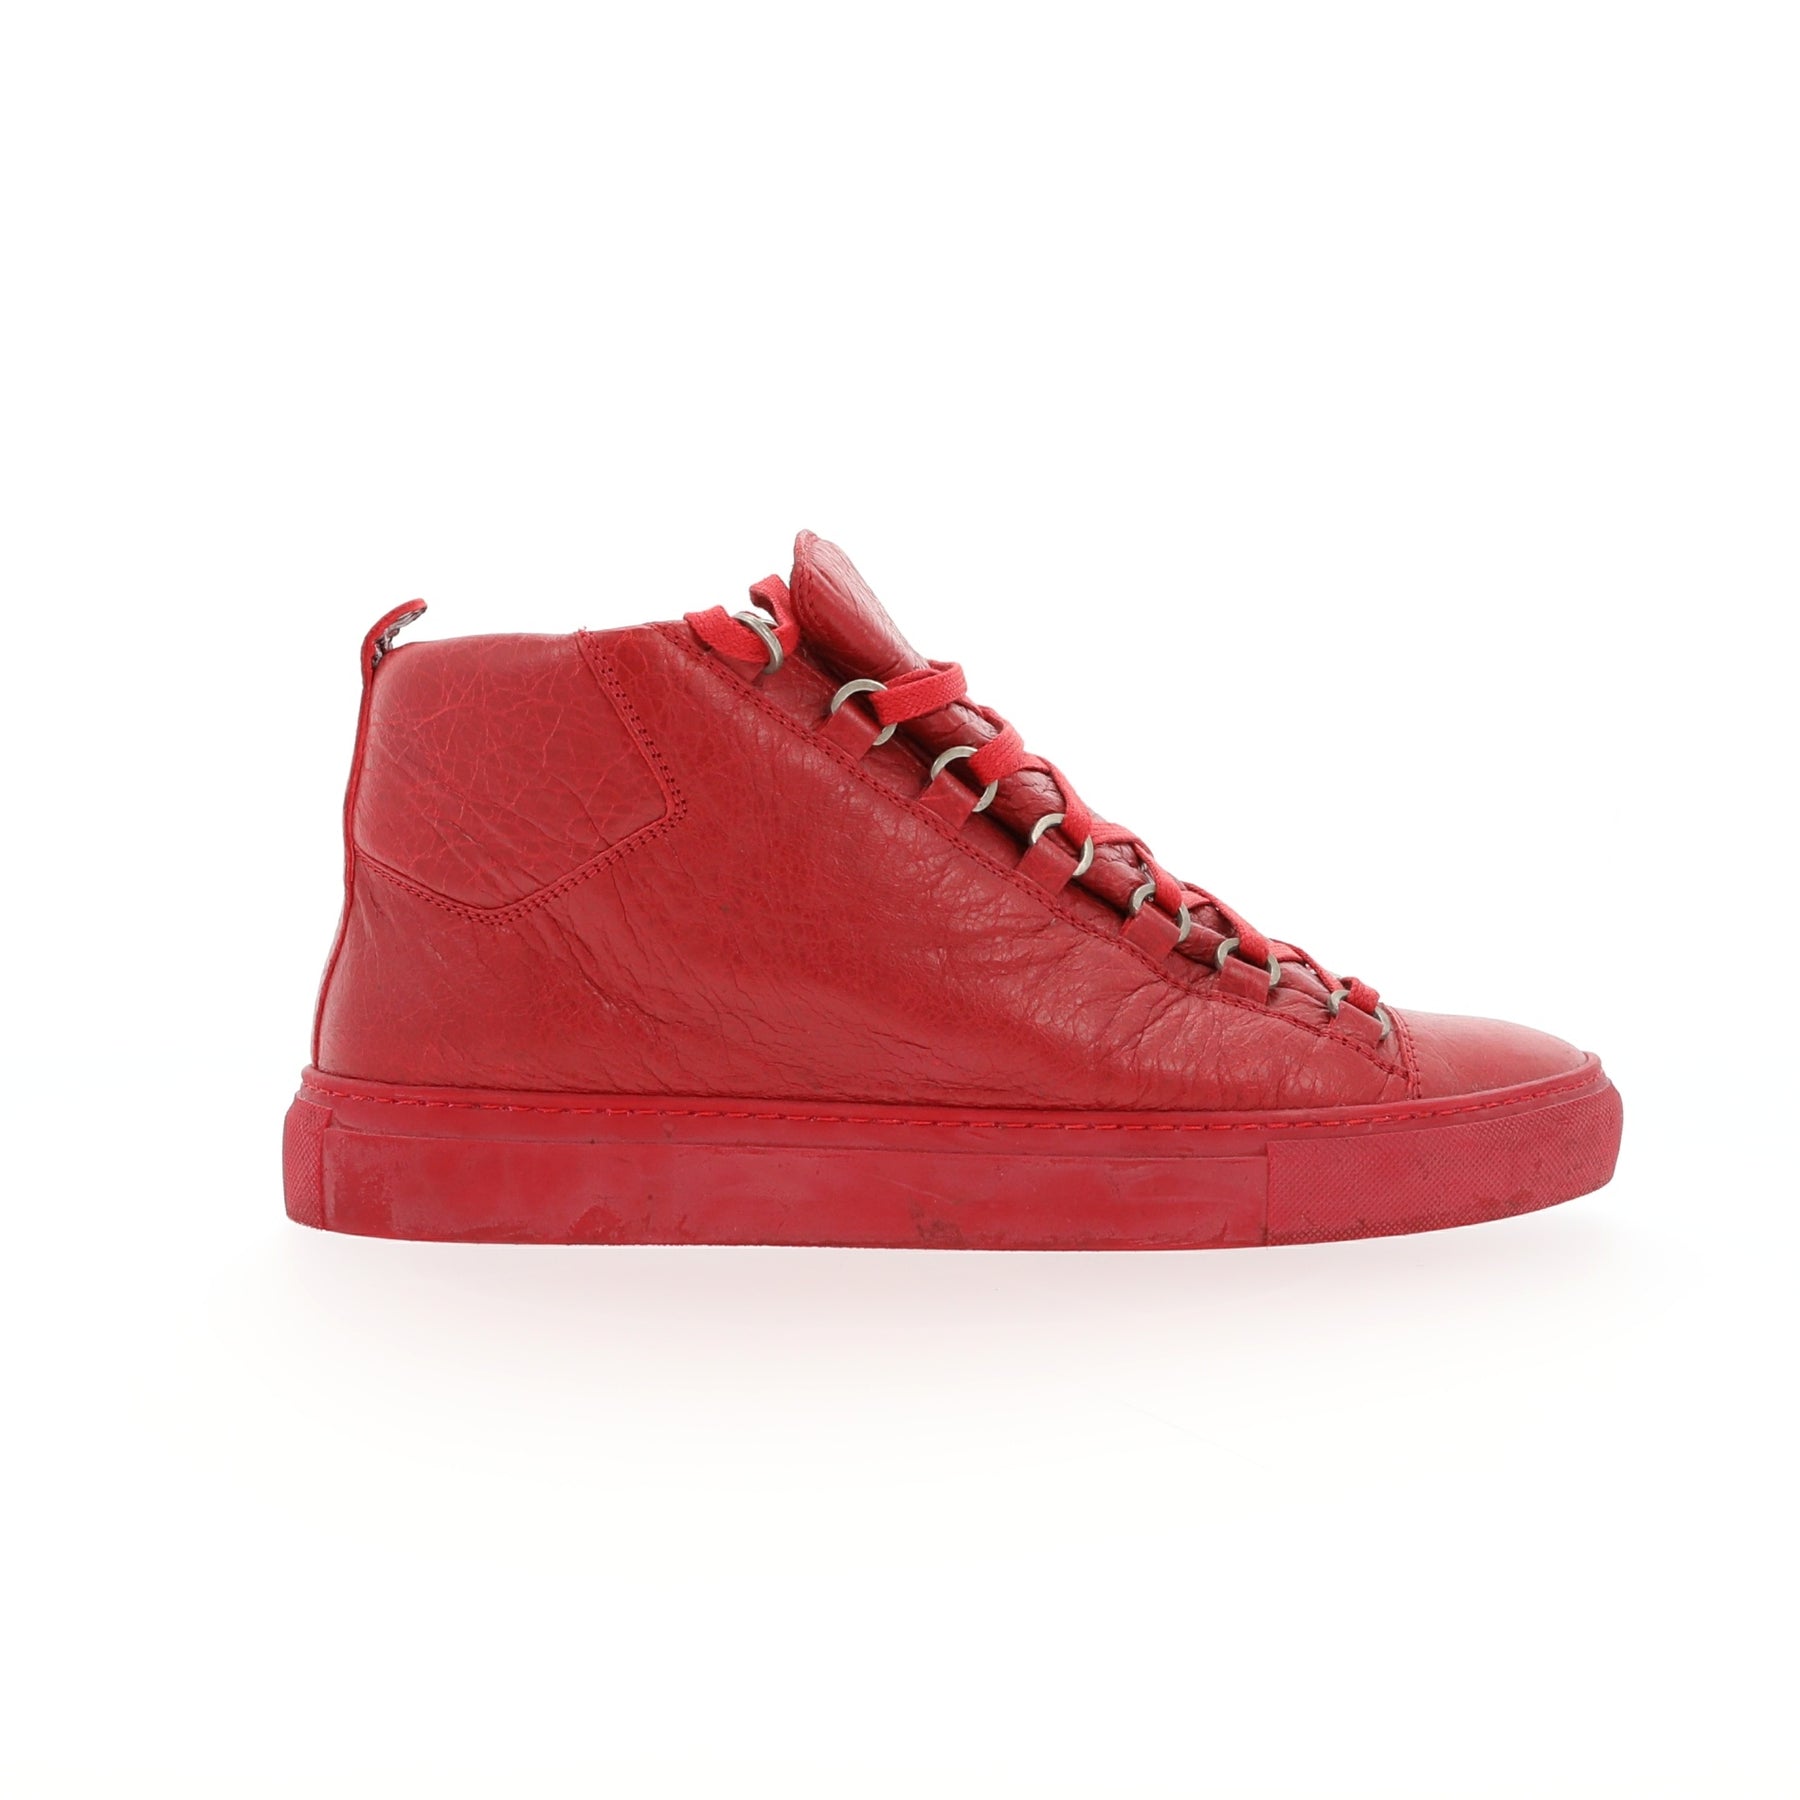 Balenciaga Arena High Top Red Leather Shoes Sneakers US 11 EU 45  eBay